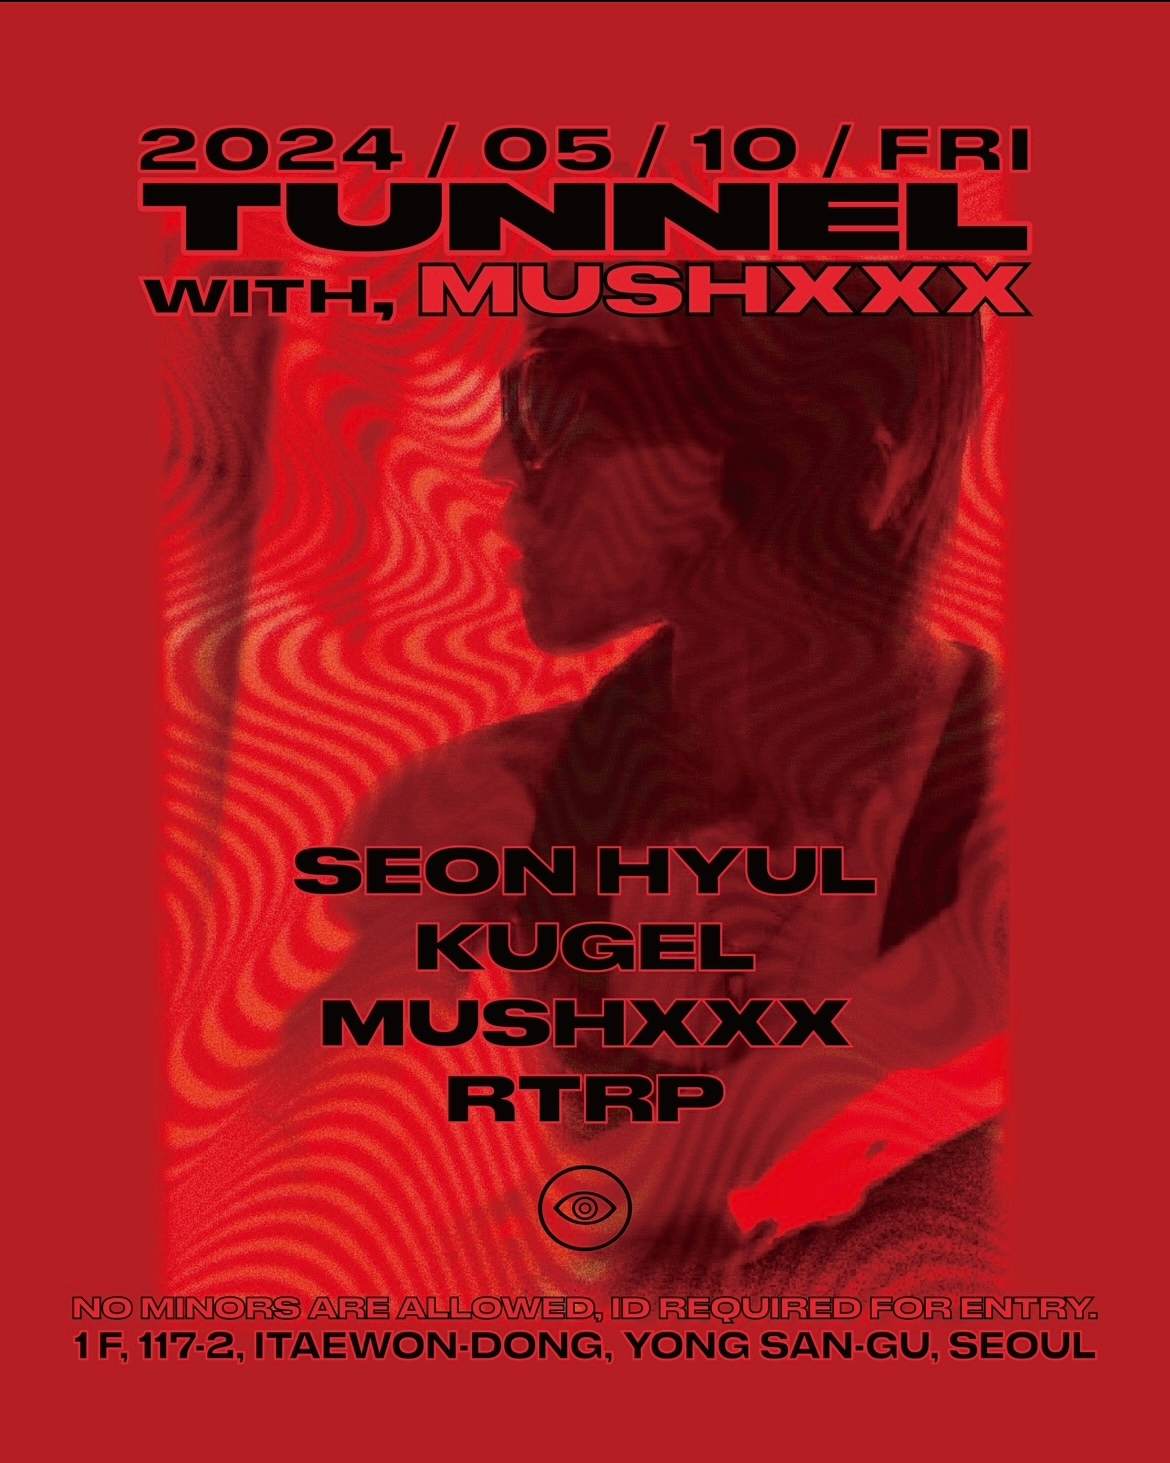 [TUNNEL SEOUL] Tunnel with MUSHXXX - フライヤー表